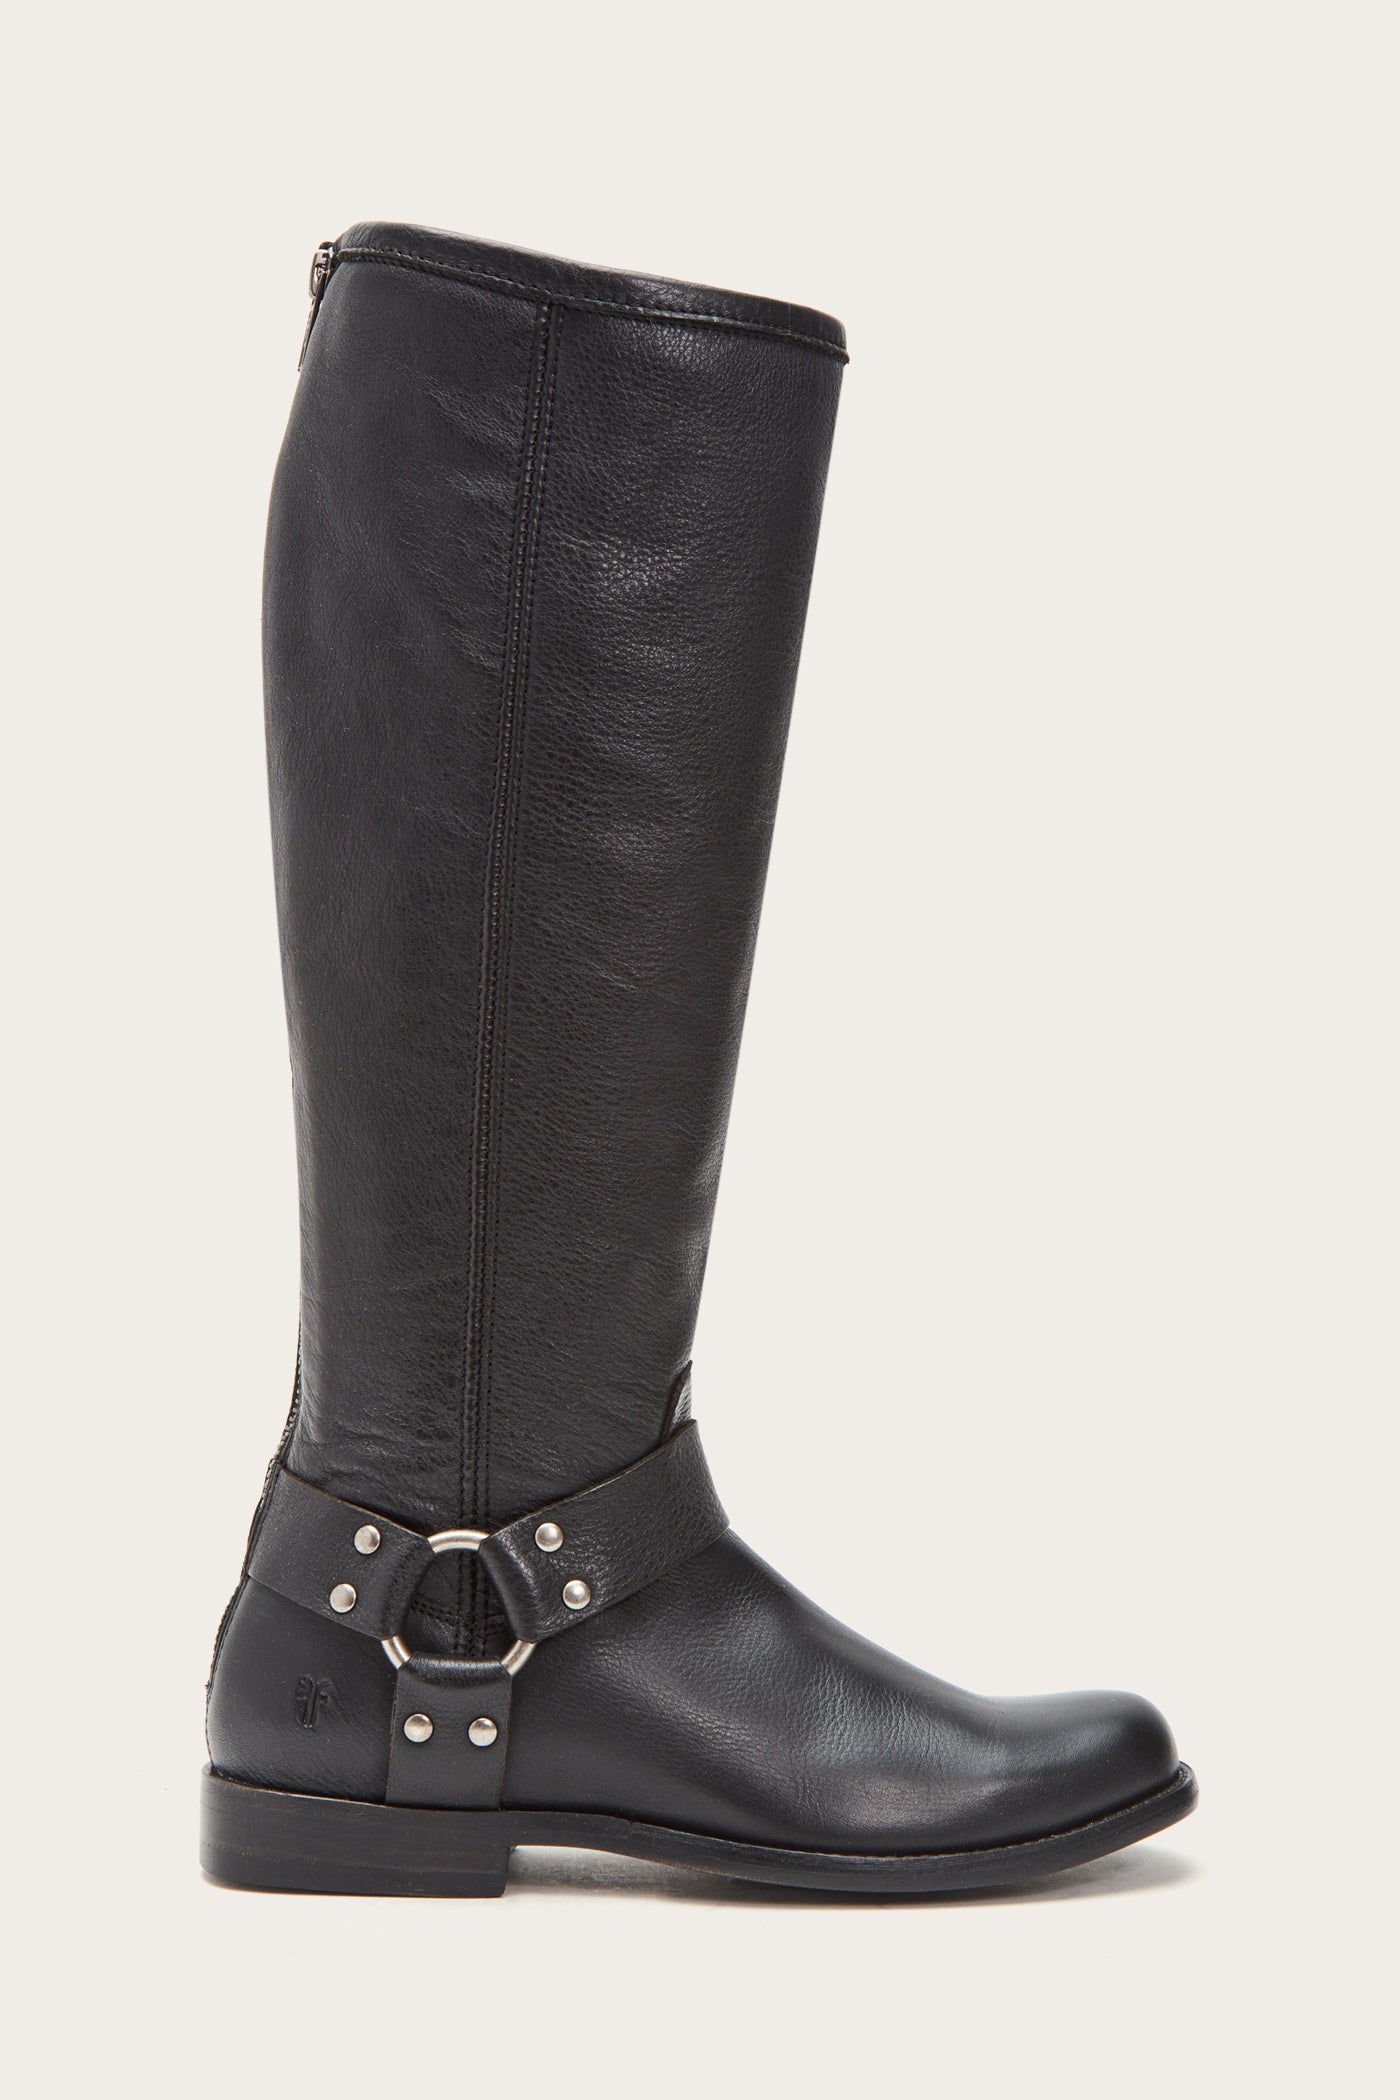 frye phillip riding boots